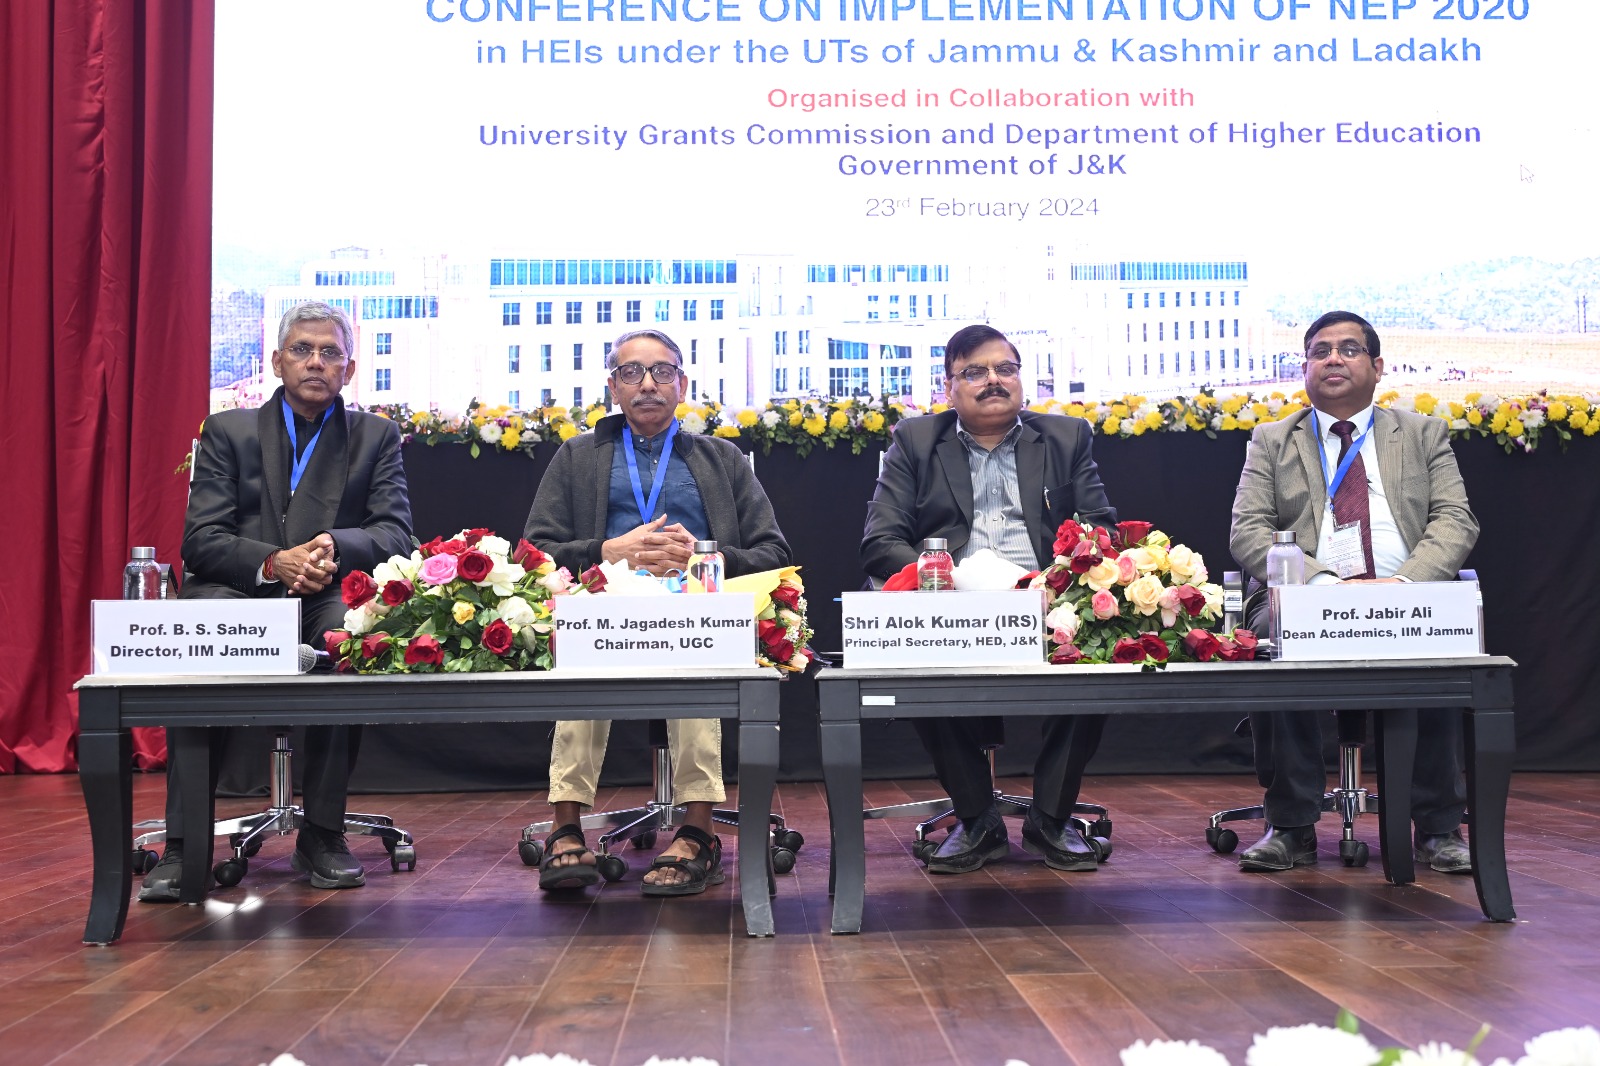 'Empowering Tomorrow's Education: IIM Jammu, UGC, and Dept. of Higher Education, Govt. of Jammu and Kashmir hosts a National Conference on NEP 2020 Implementation in HEIs of Jammu & Kashmir and Ladakh'